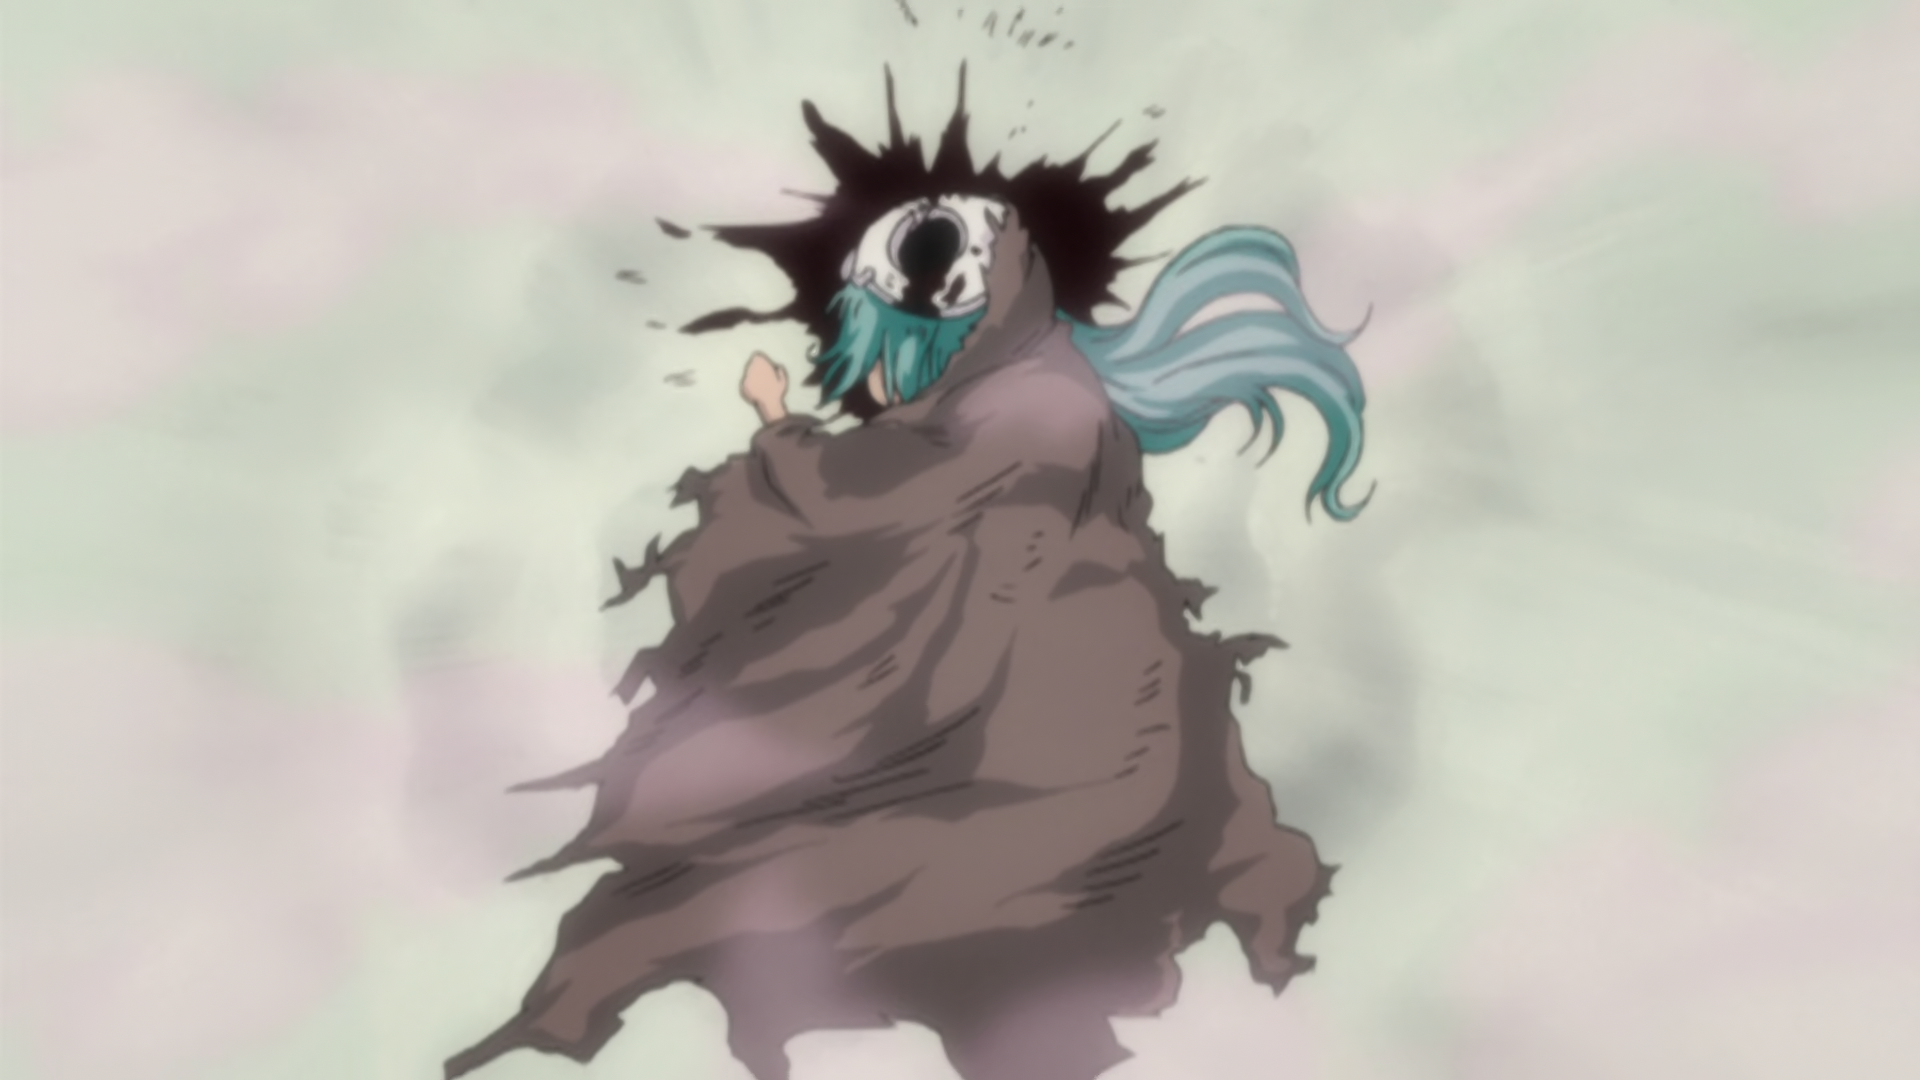 -http://images1.wikia.nocookie.net/__cb20120624023834/bleach/en/images/a/a0/Nel_turns_into_a_child.png